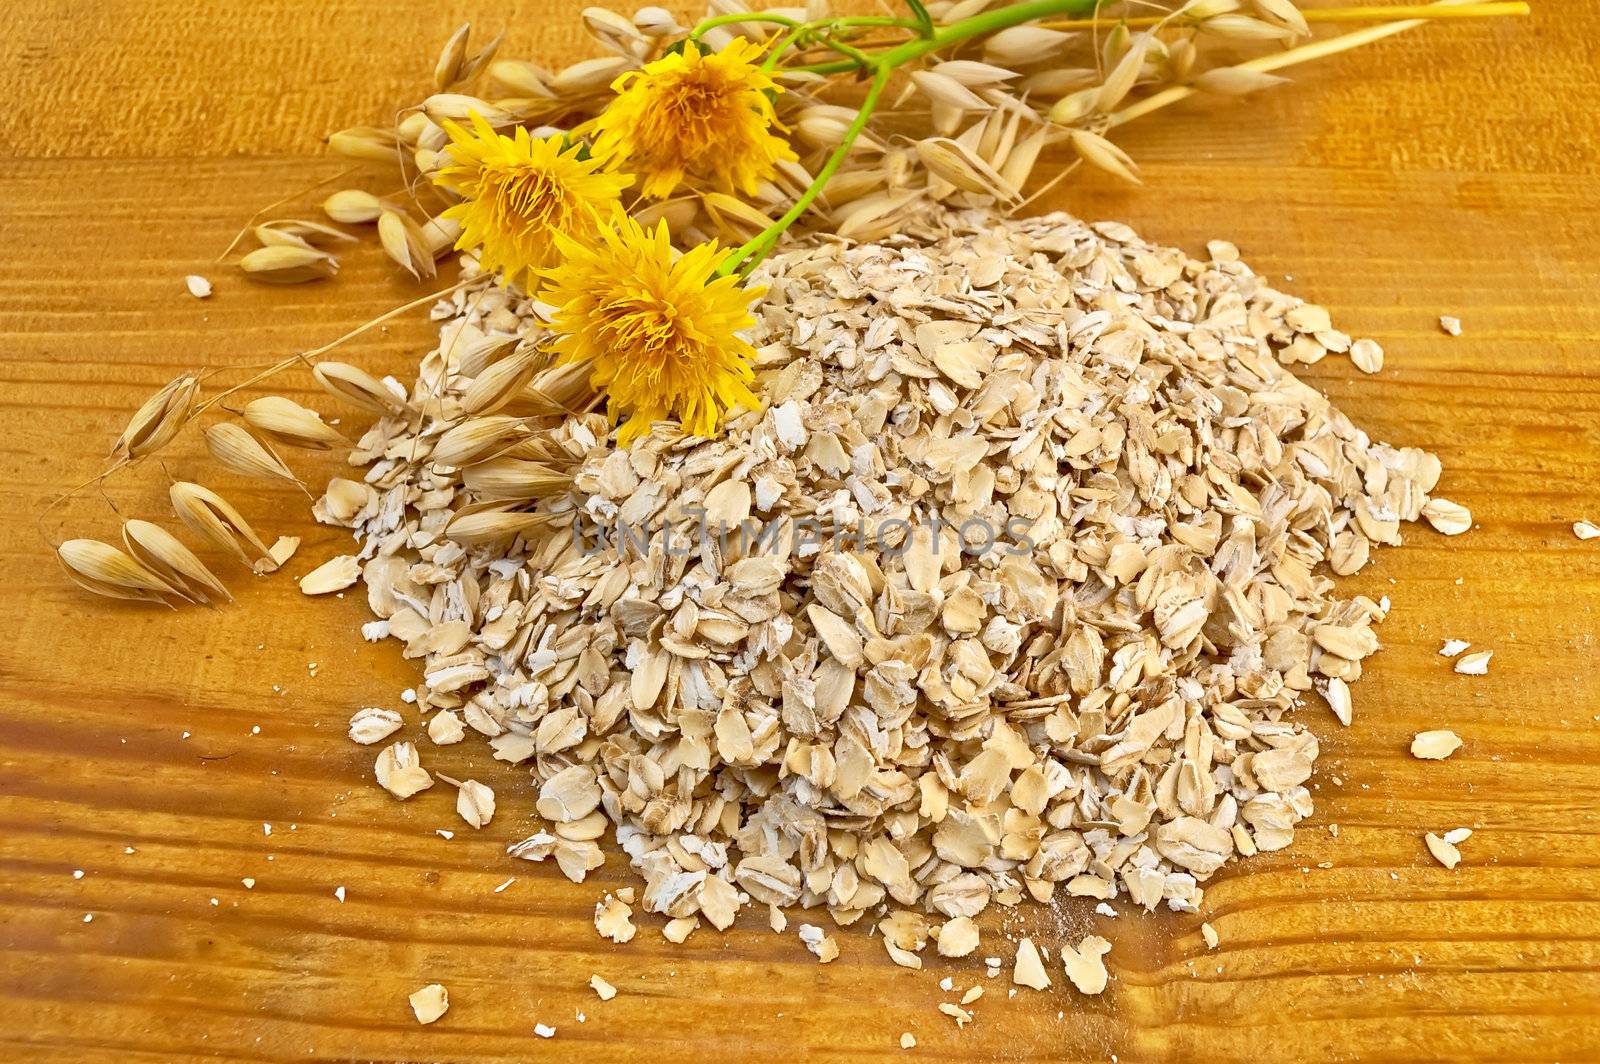 Oatmeal with yellow wild flowers and stalks of oats against a wooden board